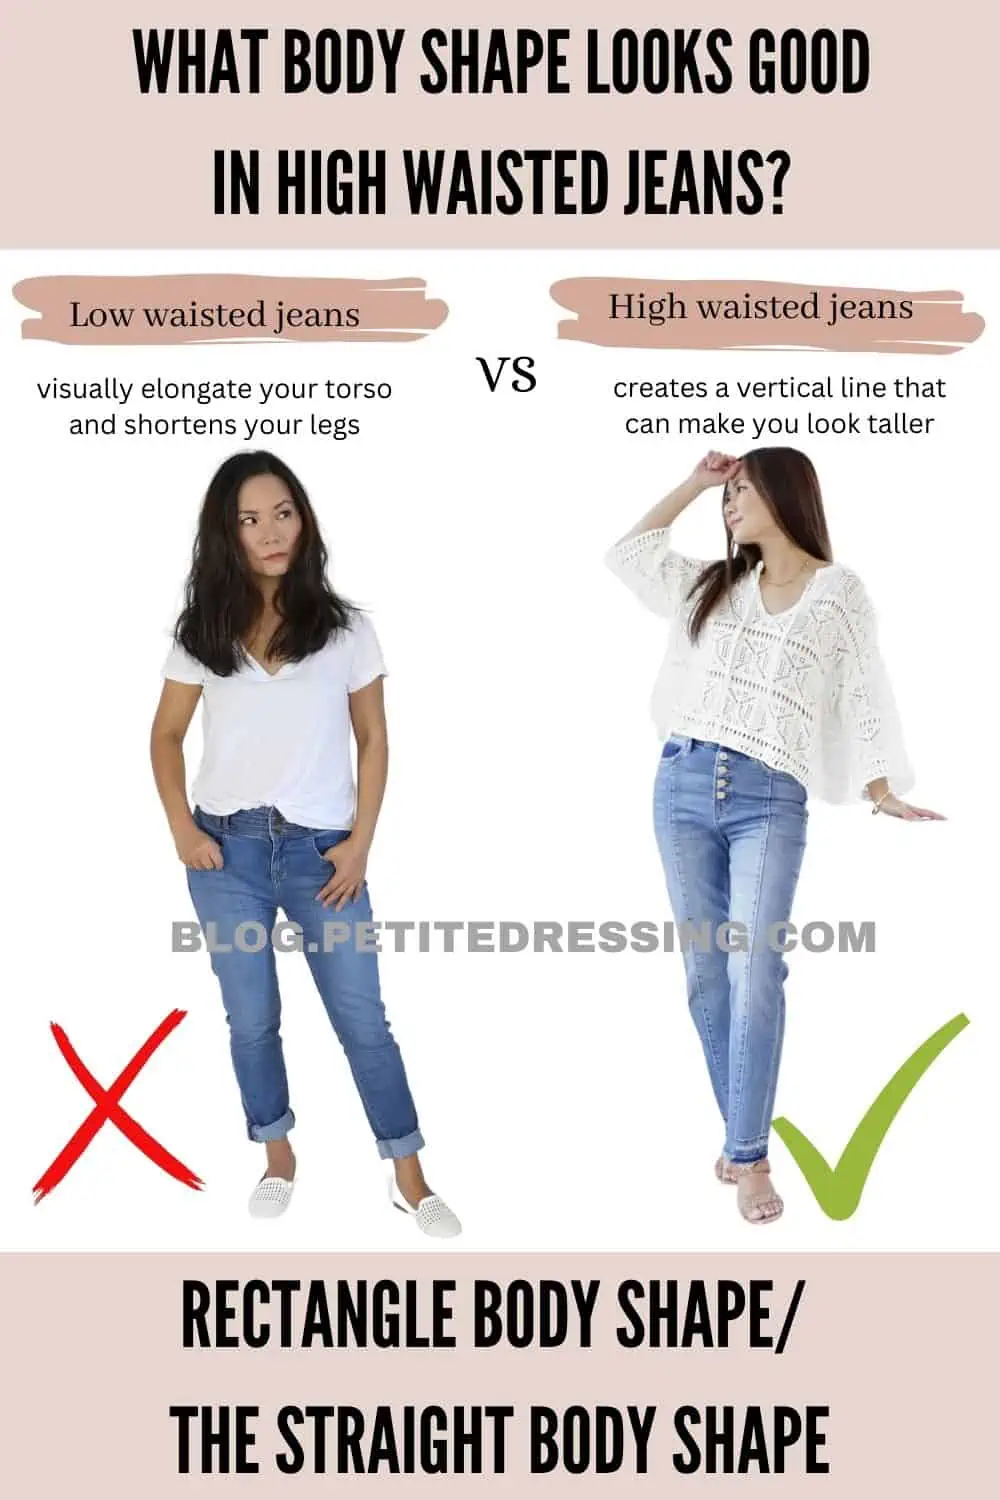 What Body Shape Looks Good in HighWaisted Jeans